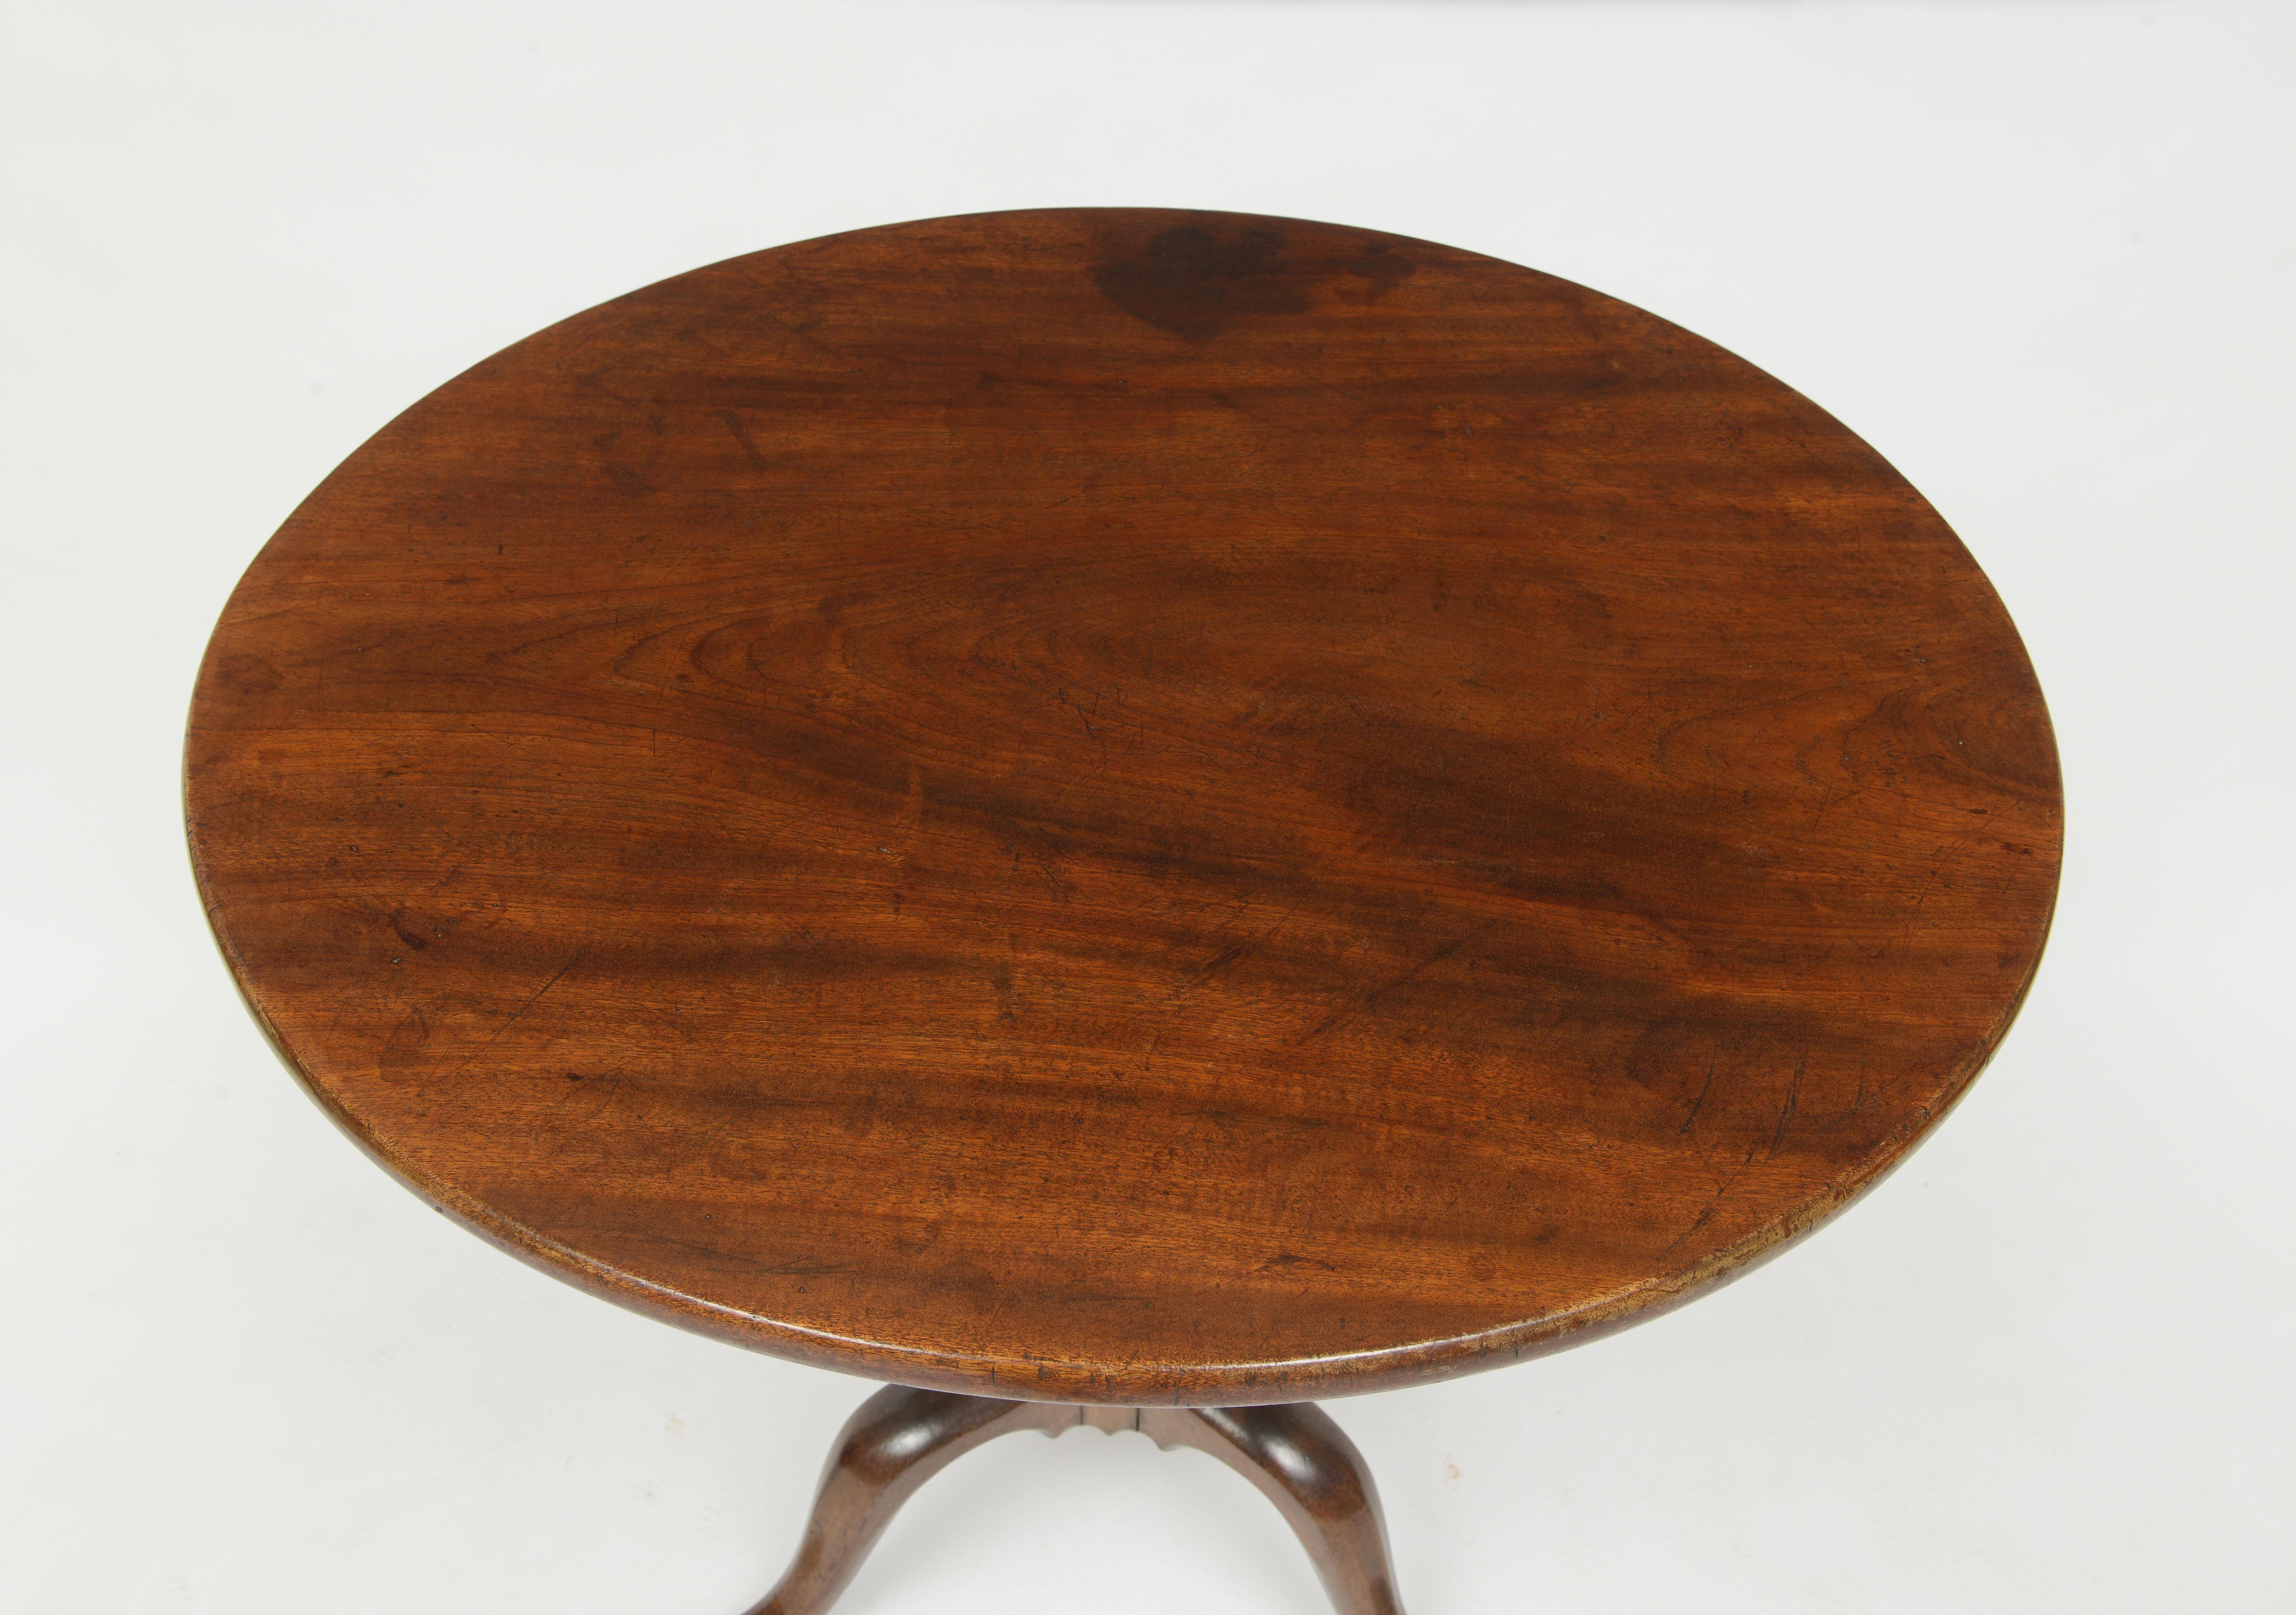 Round Top Tripod Table in Walnut Finished With Shellac and Wax Finish For Sale 2